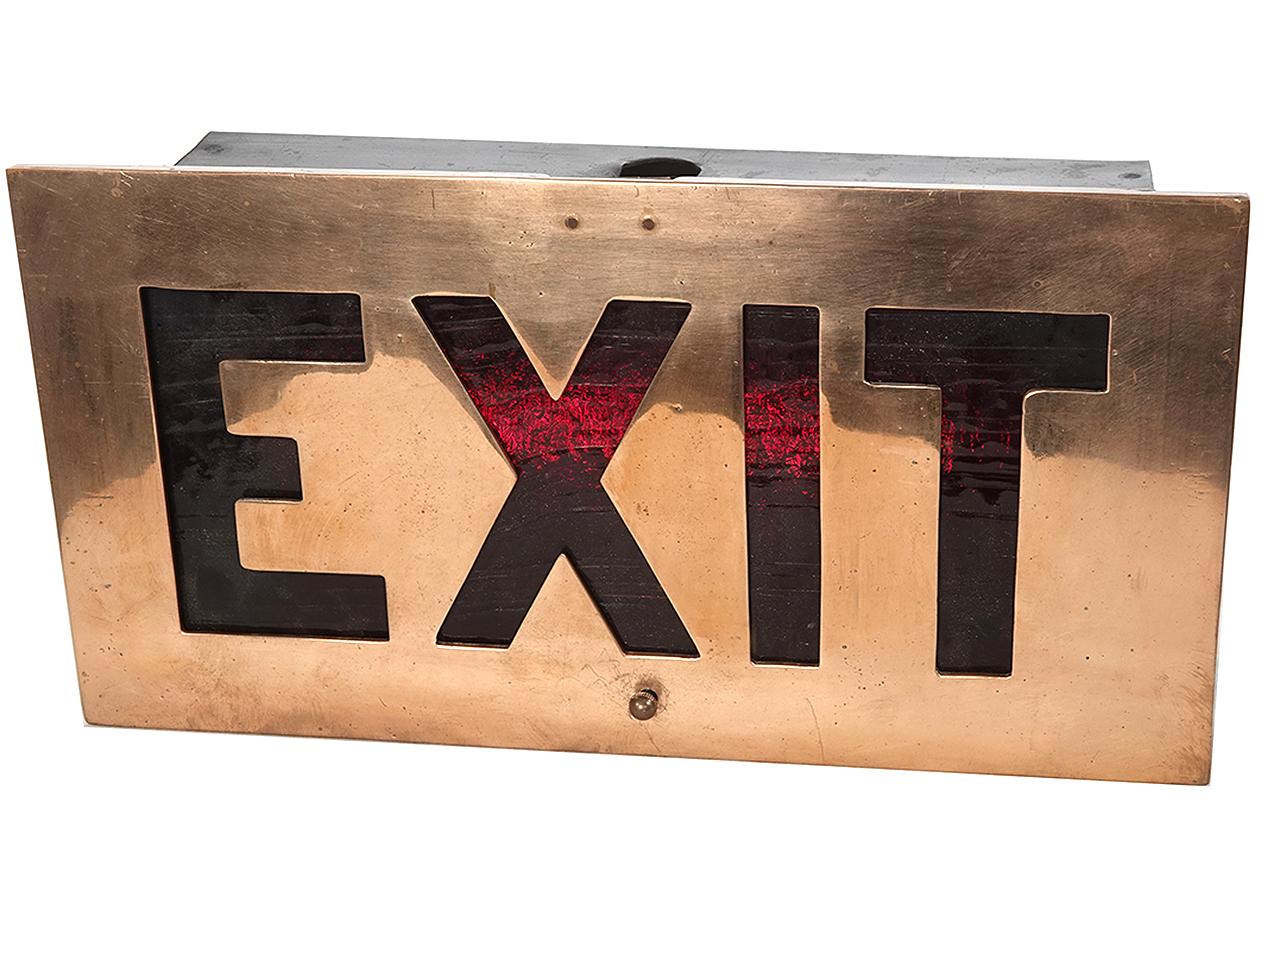 We have a collection of there heavy bronze EXIT signs. They were salvaged from a 1920-30s 5th Avenue Manhattan hotel. The front plate is .25 inch thick bronze with a textured red glass behind it. There are priced per sign so you can buy just on or